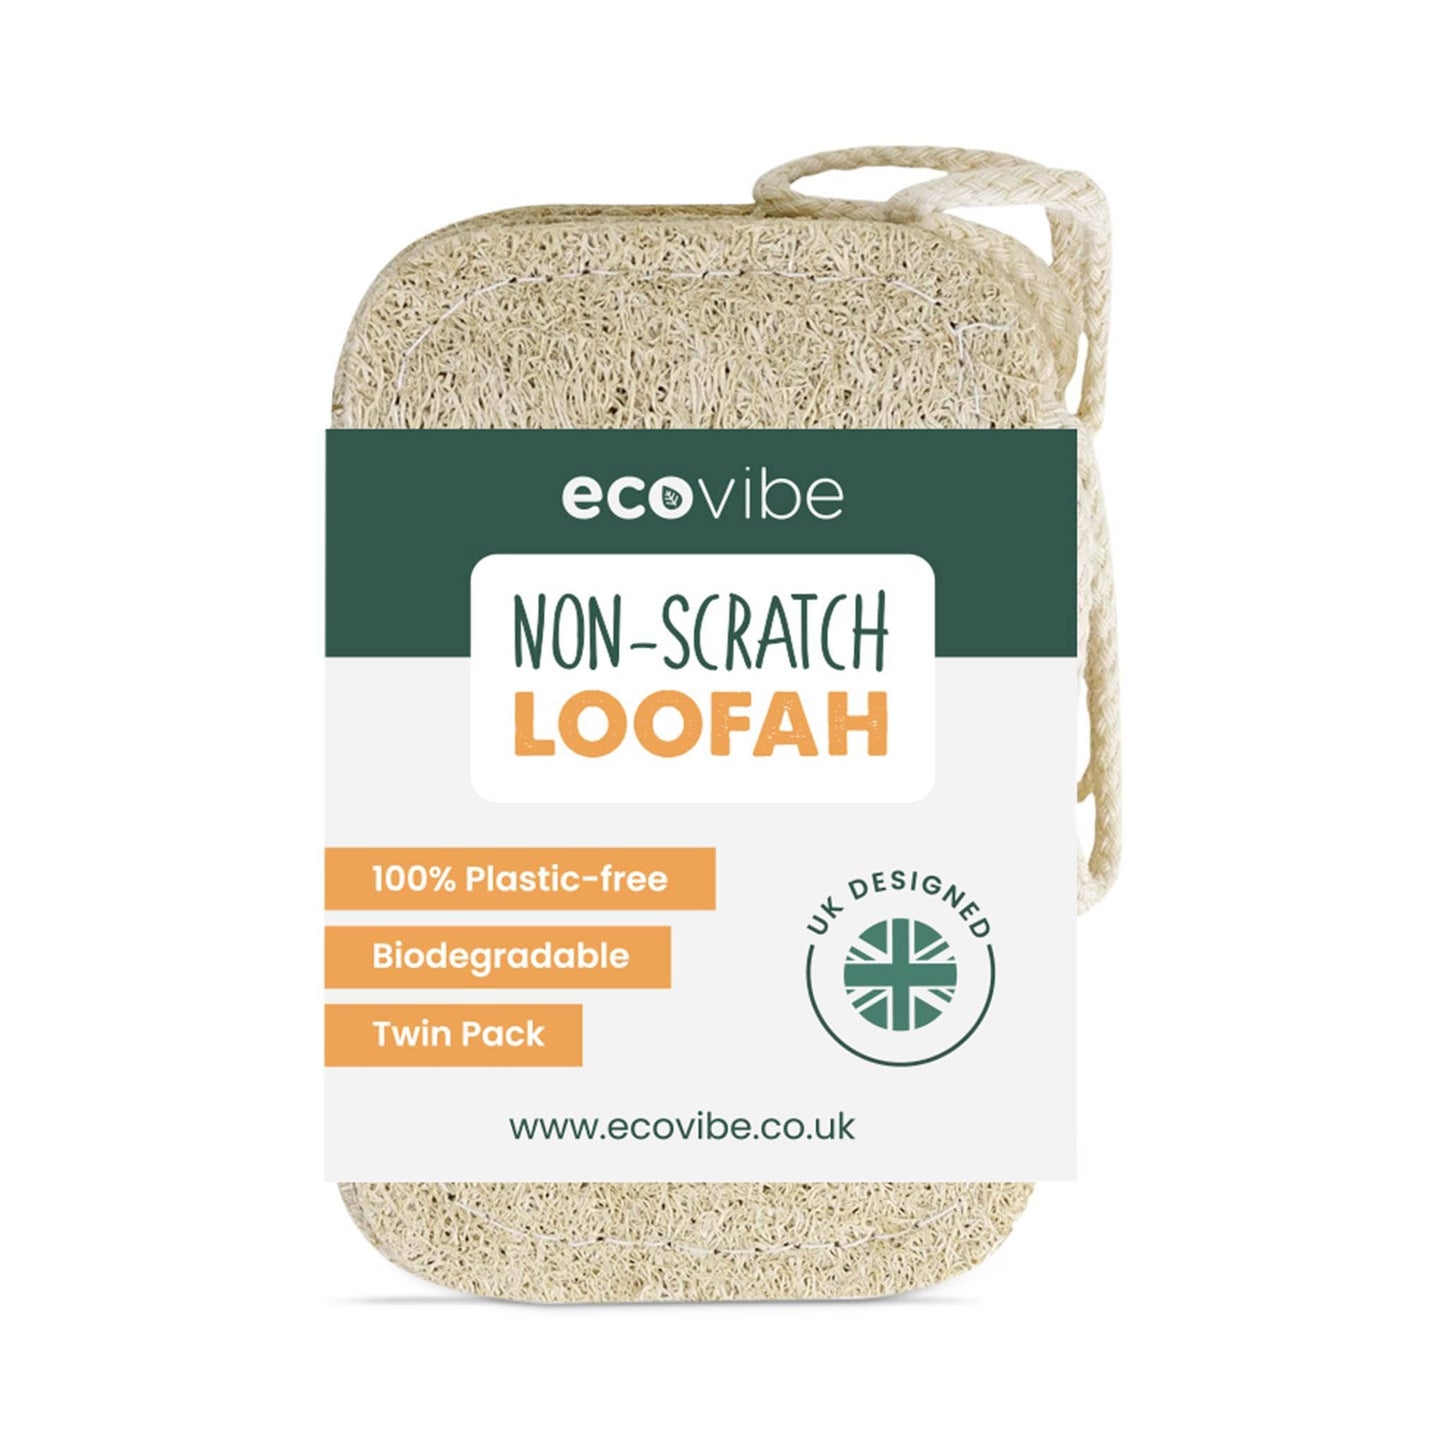 EcoVibe Sponges & Scouring Pads Washing Up Loofah - 2 Pack - EcoVibe